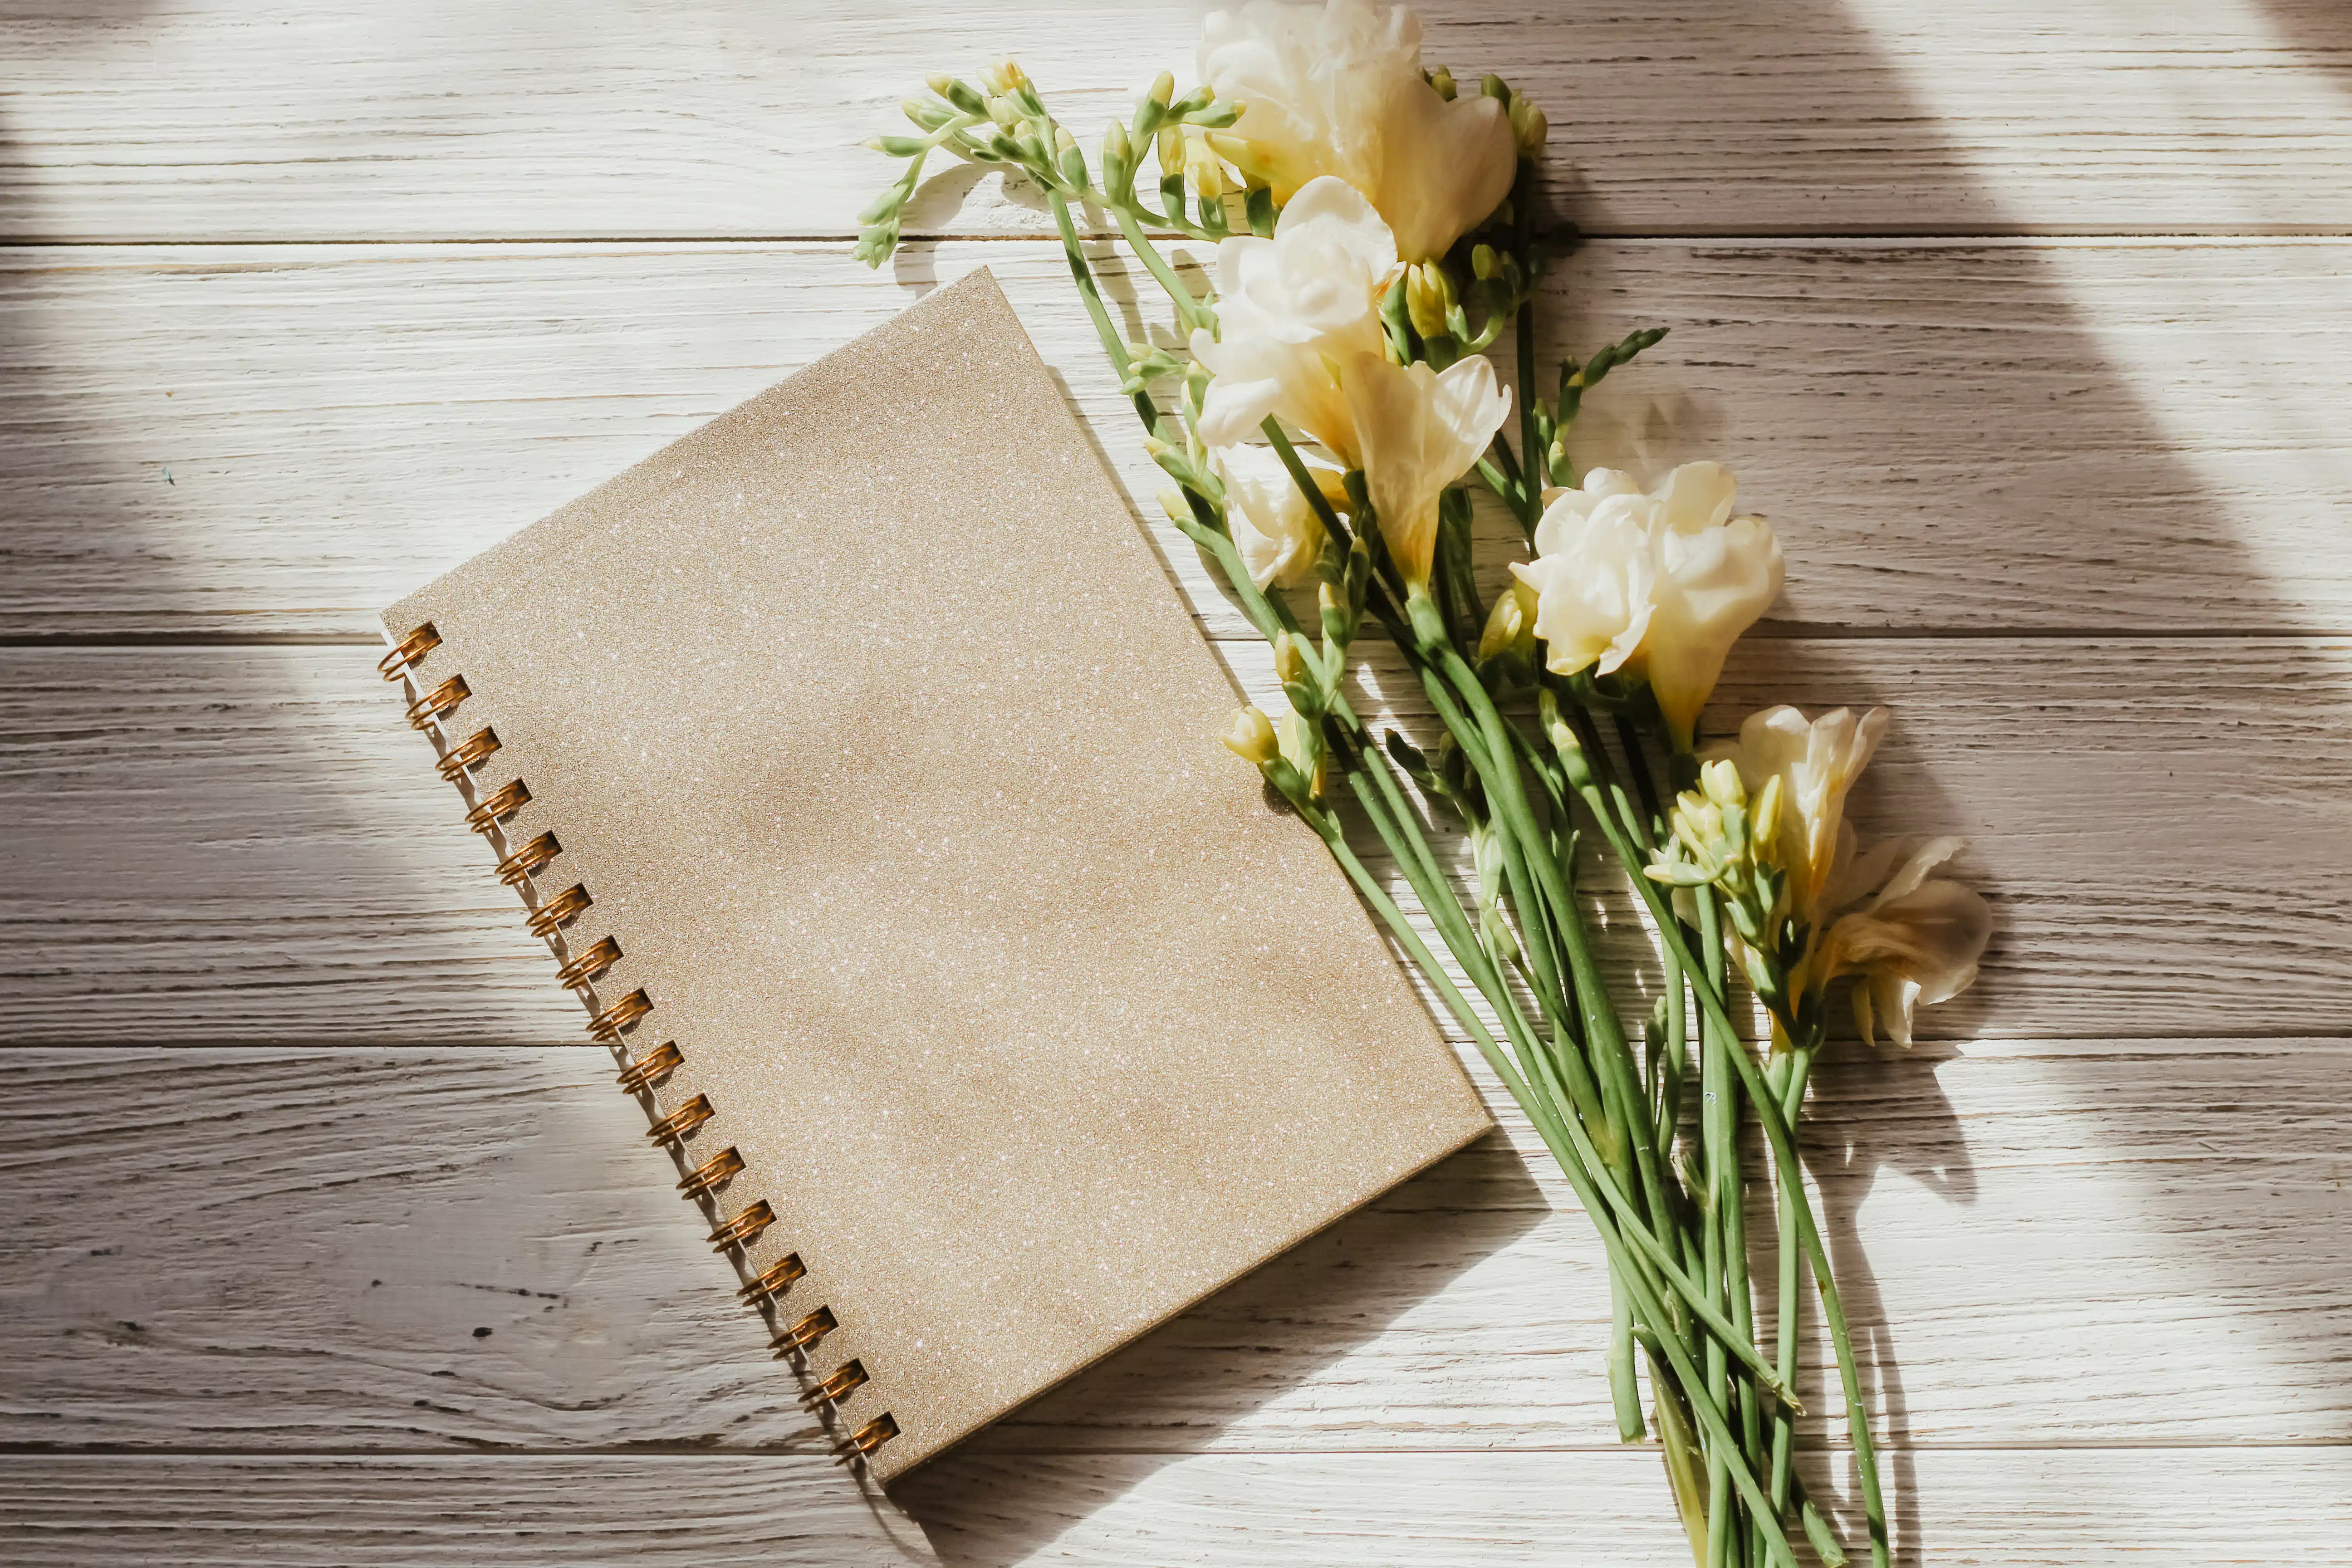 Diary notebook on the background of flowers and wooden figured boards